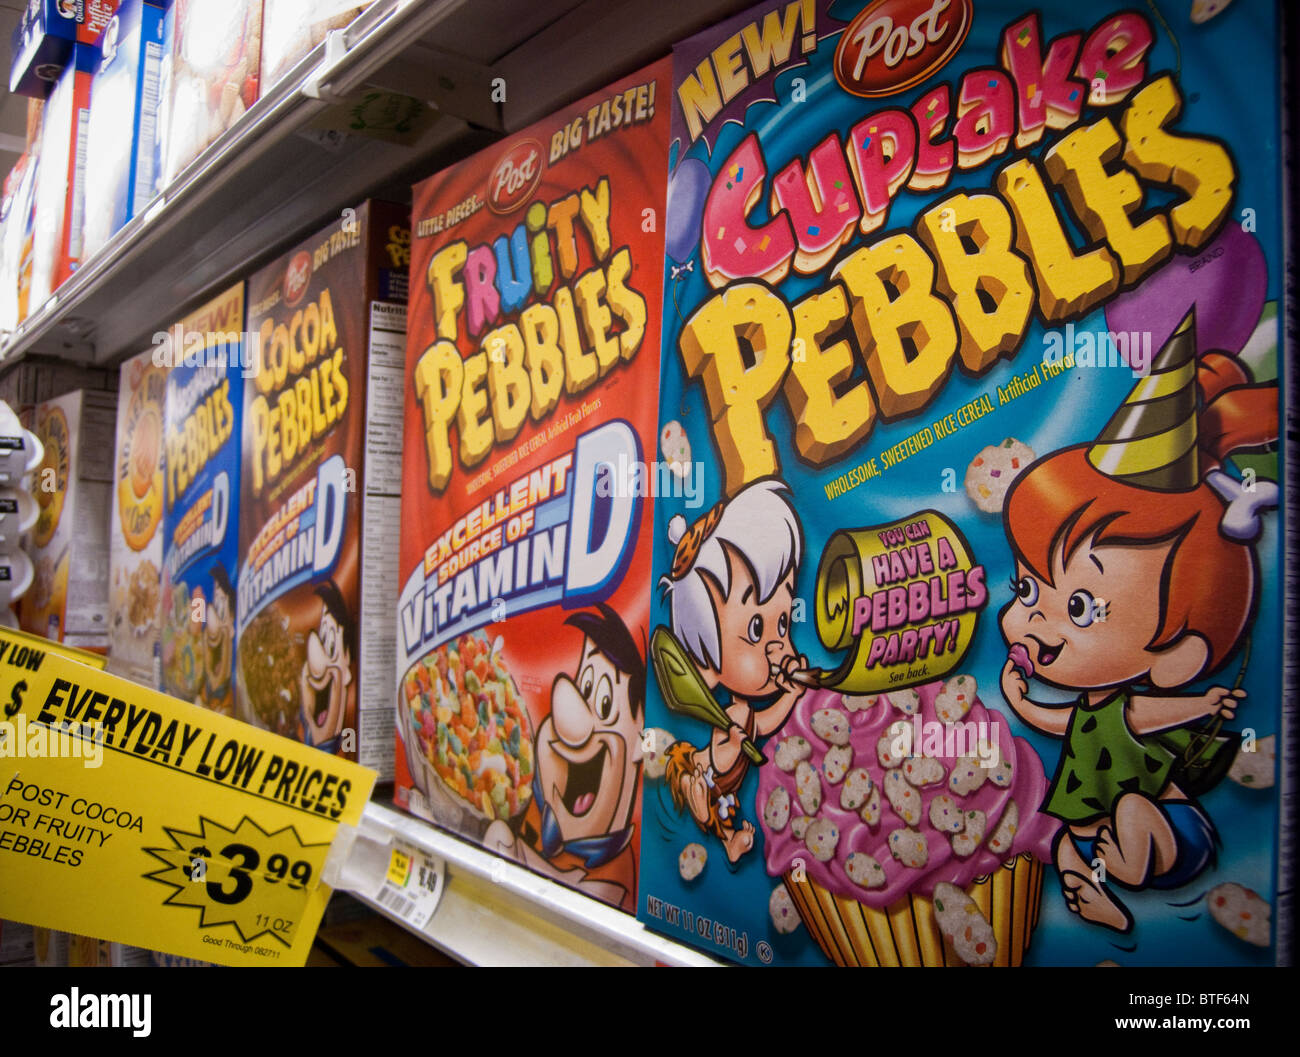 Boxes of Post breakfast cereal featuring The Flintstones cartoon characters Stock Photo